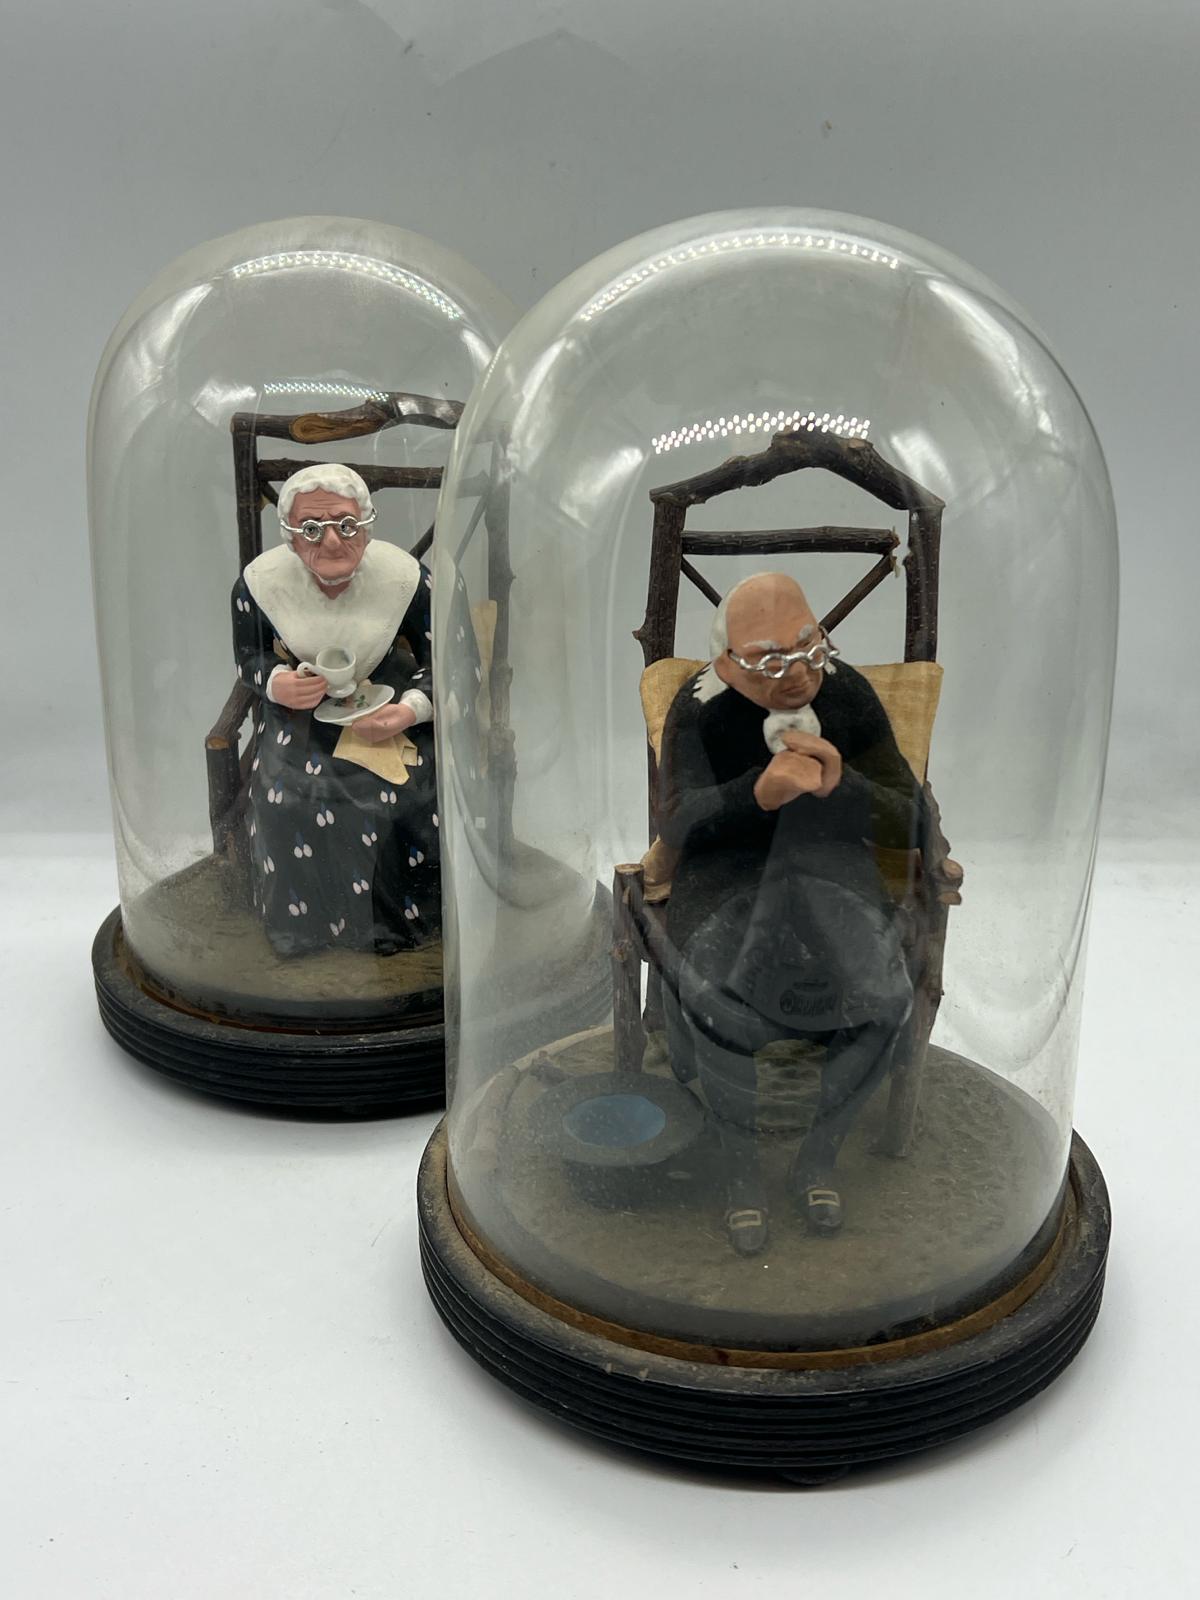 A pair of papier mache lady and gentleman seated figures under glass domes and linths (H23cm)